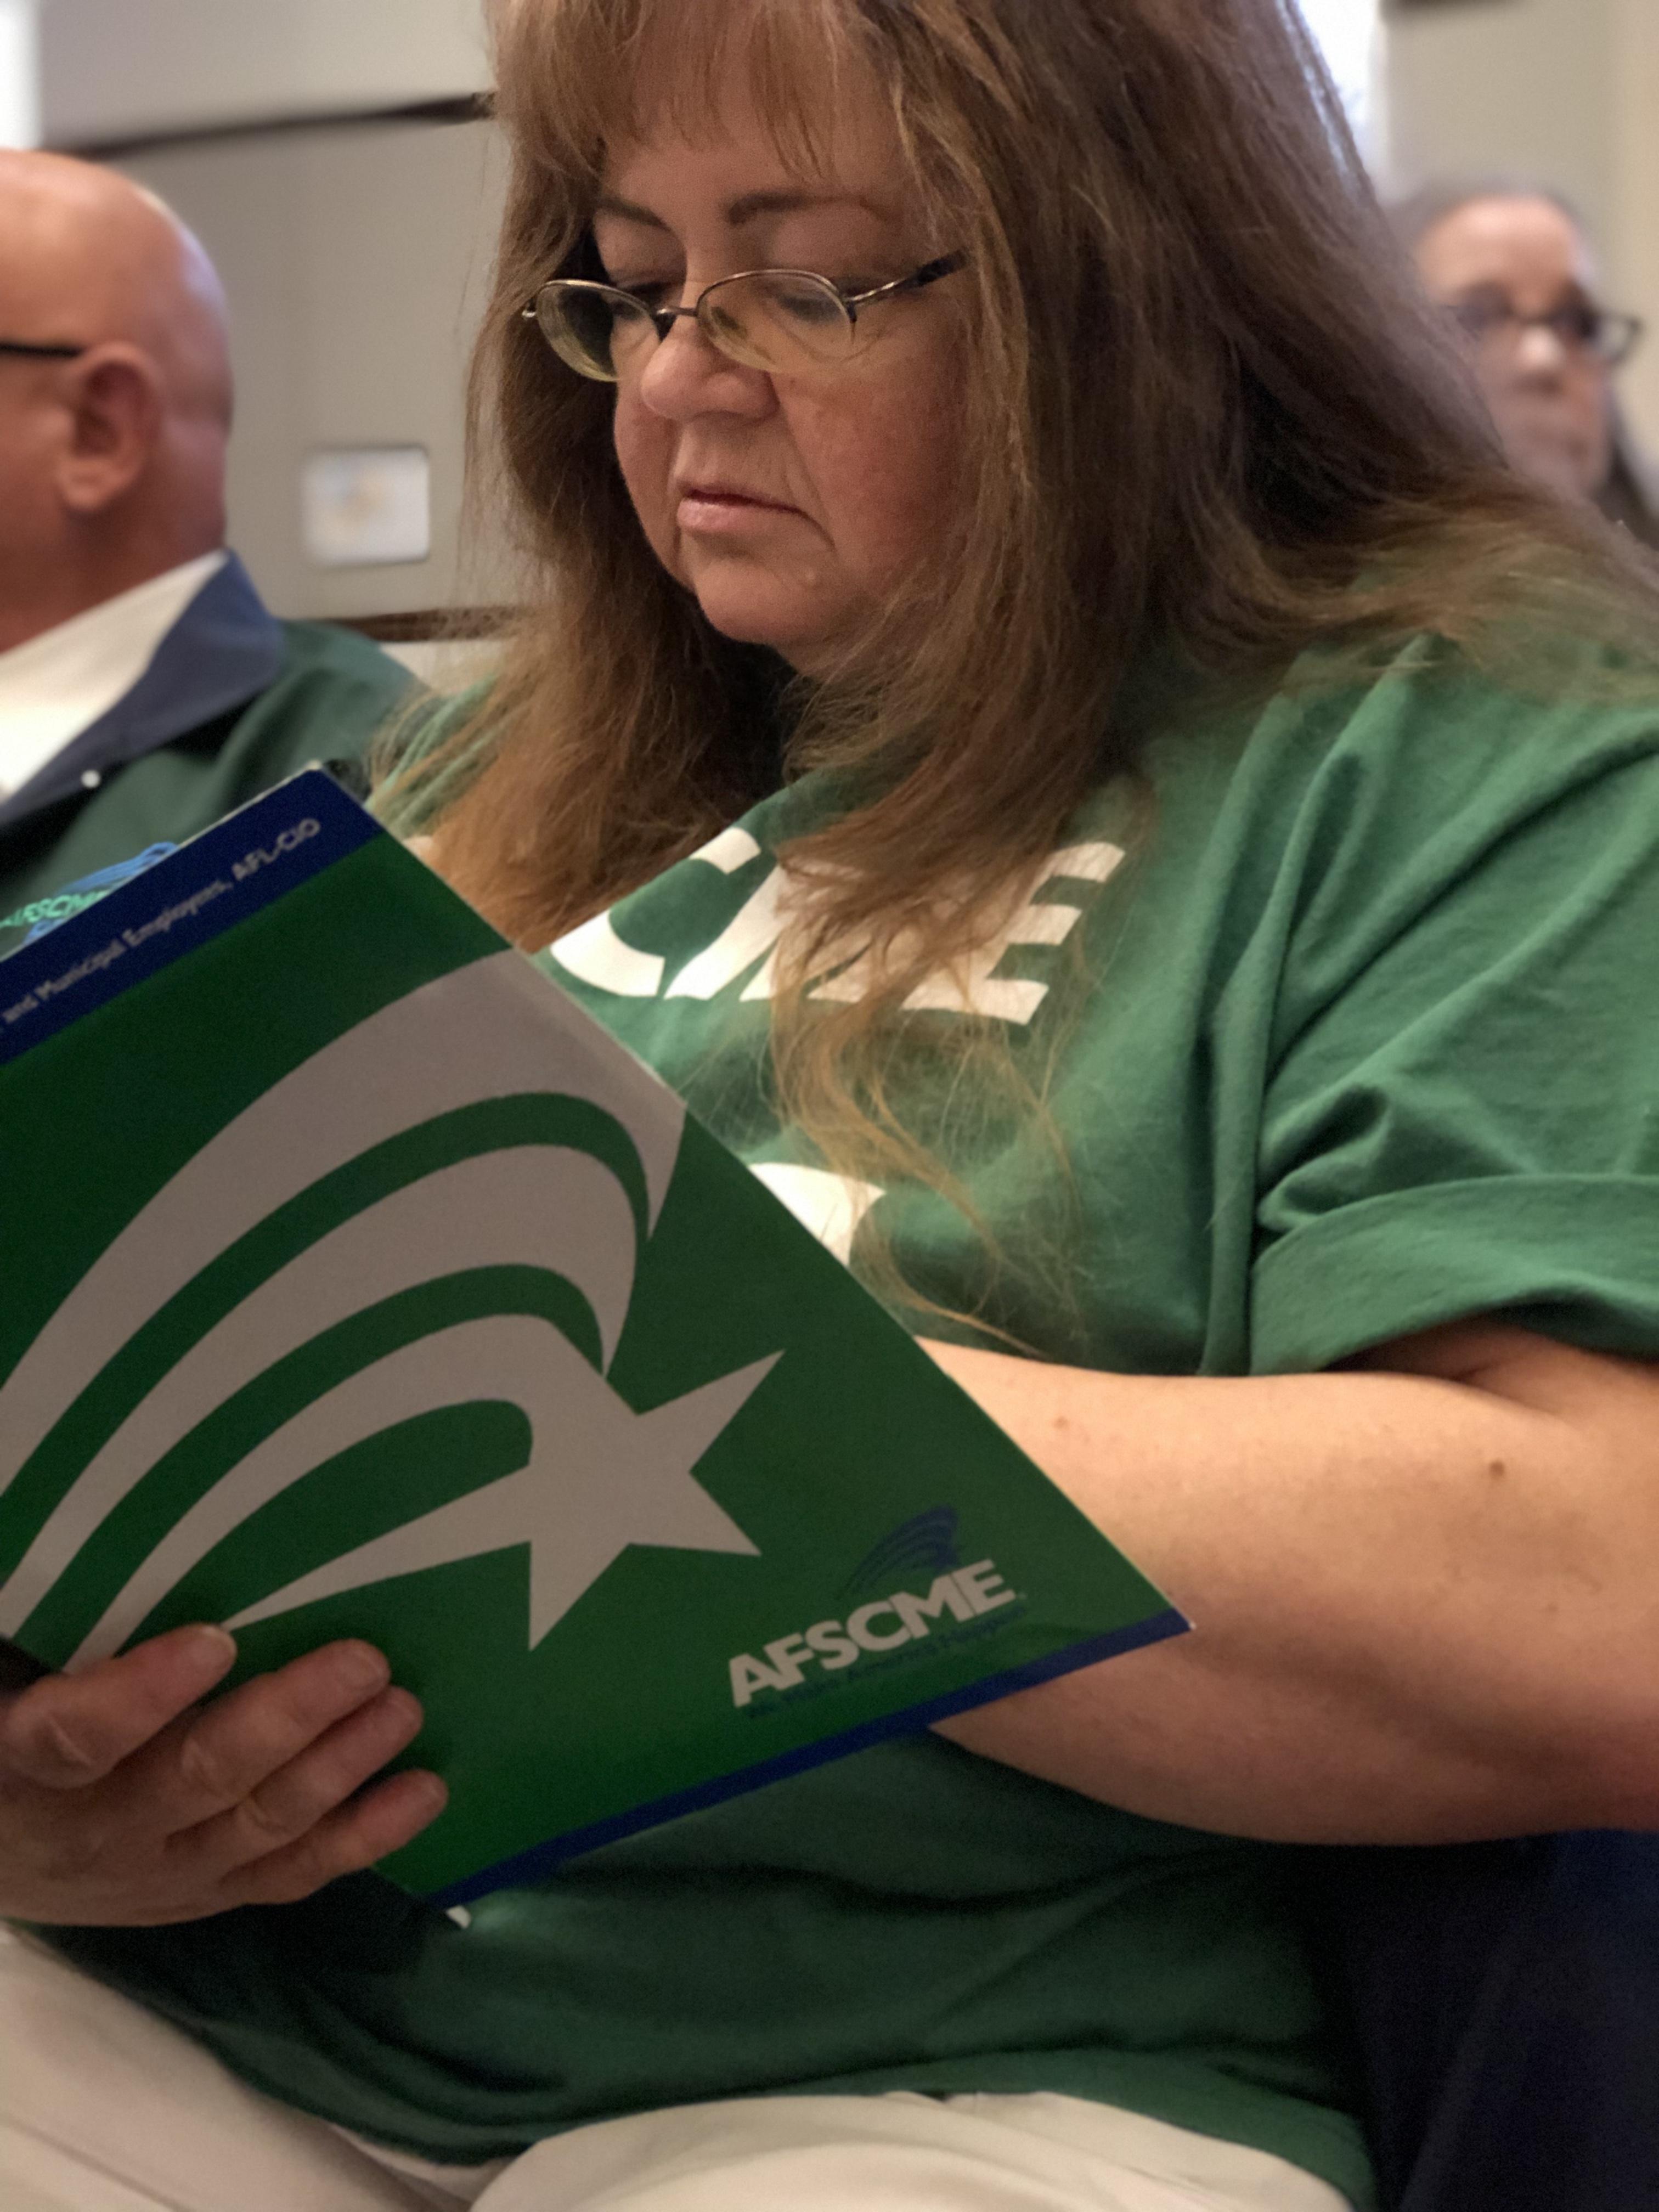 AFSCME Local 4041 member Deborah Hinds at a hearing in support of collective bargaining rights SB135